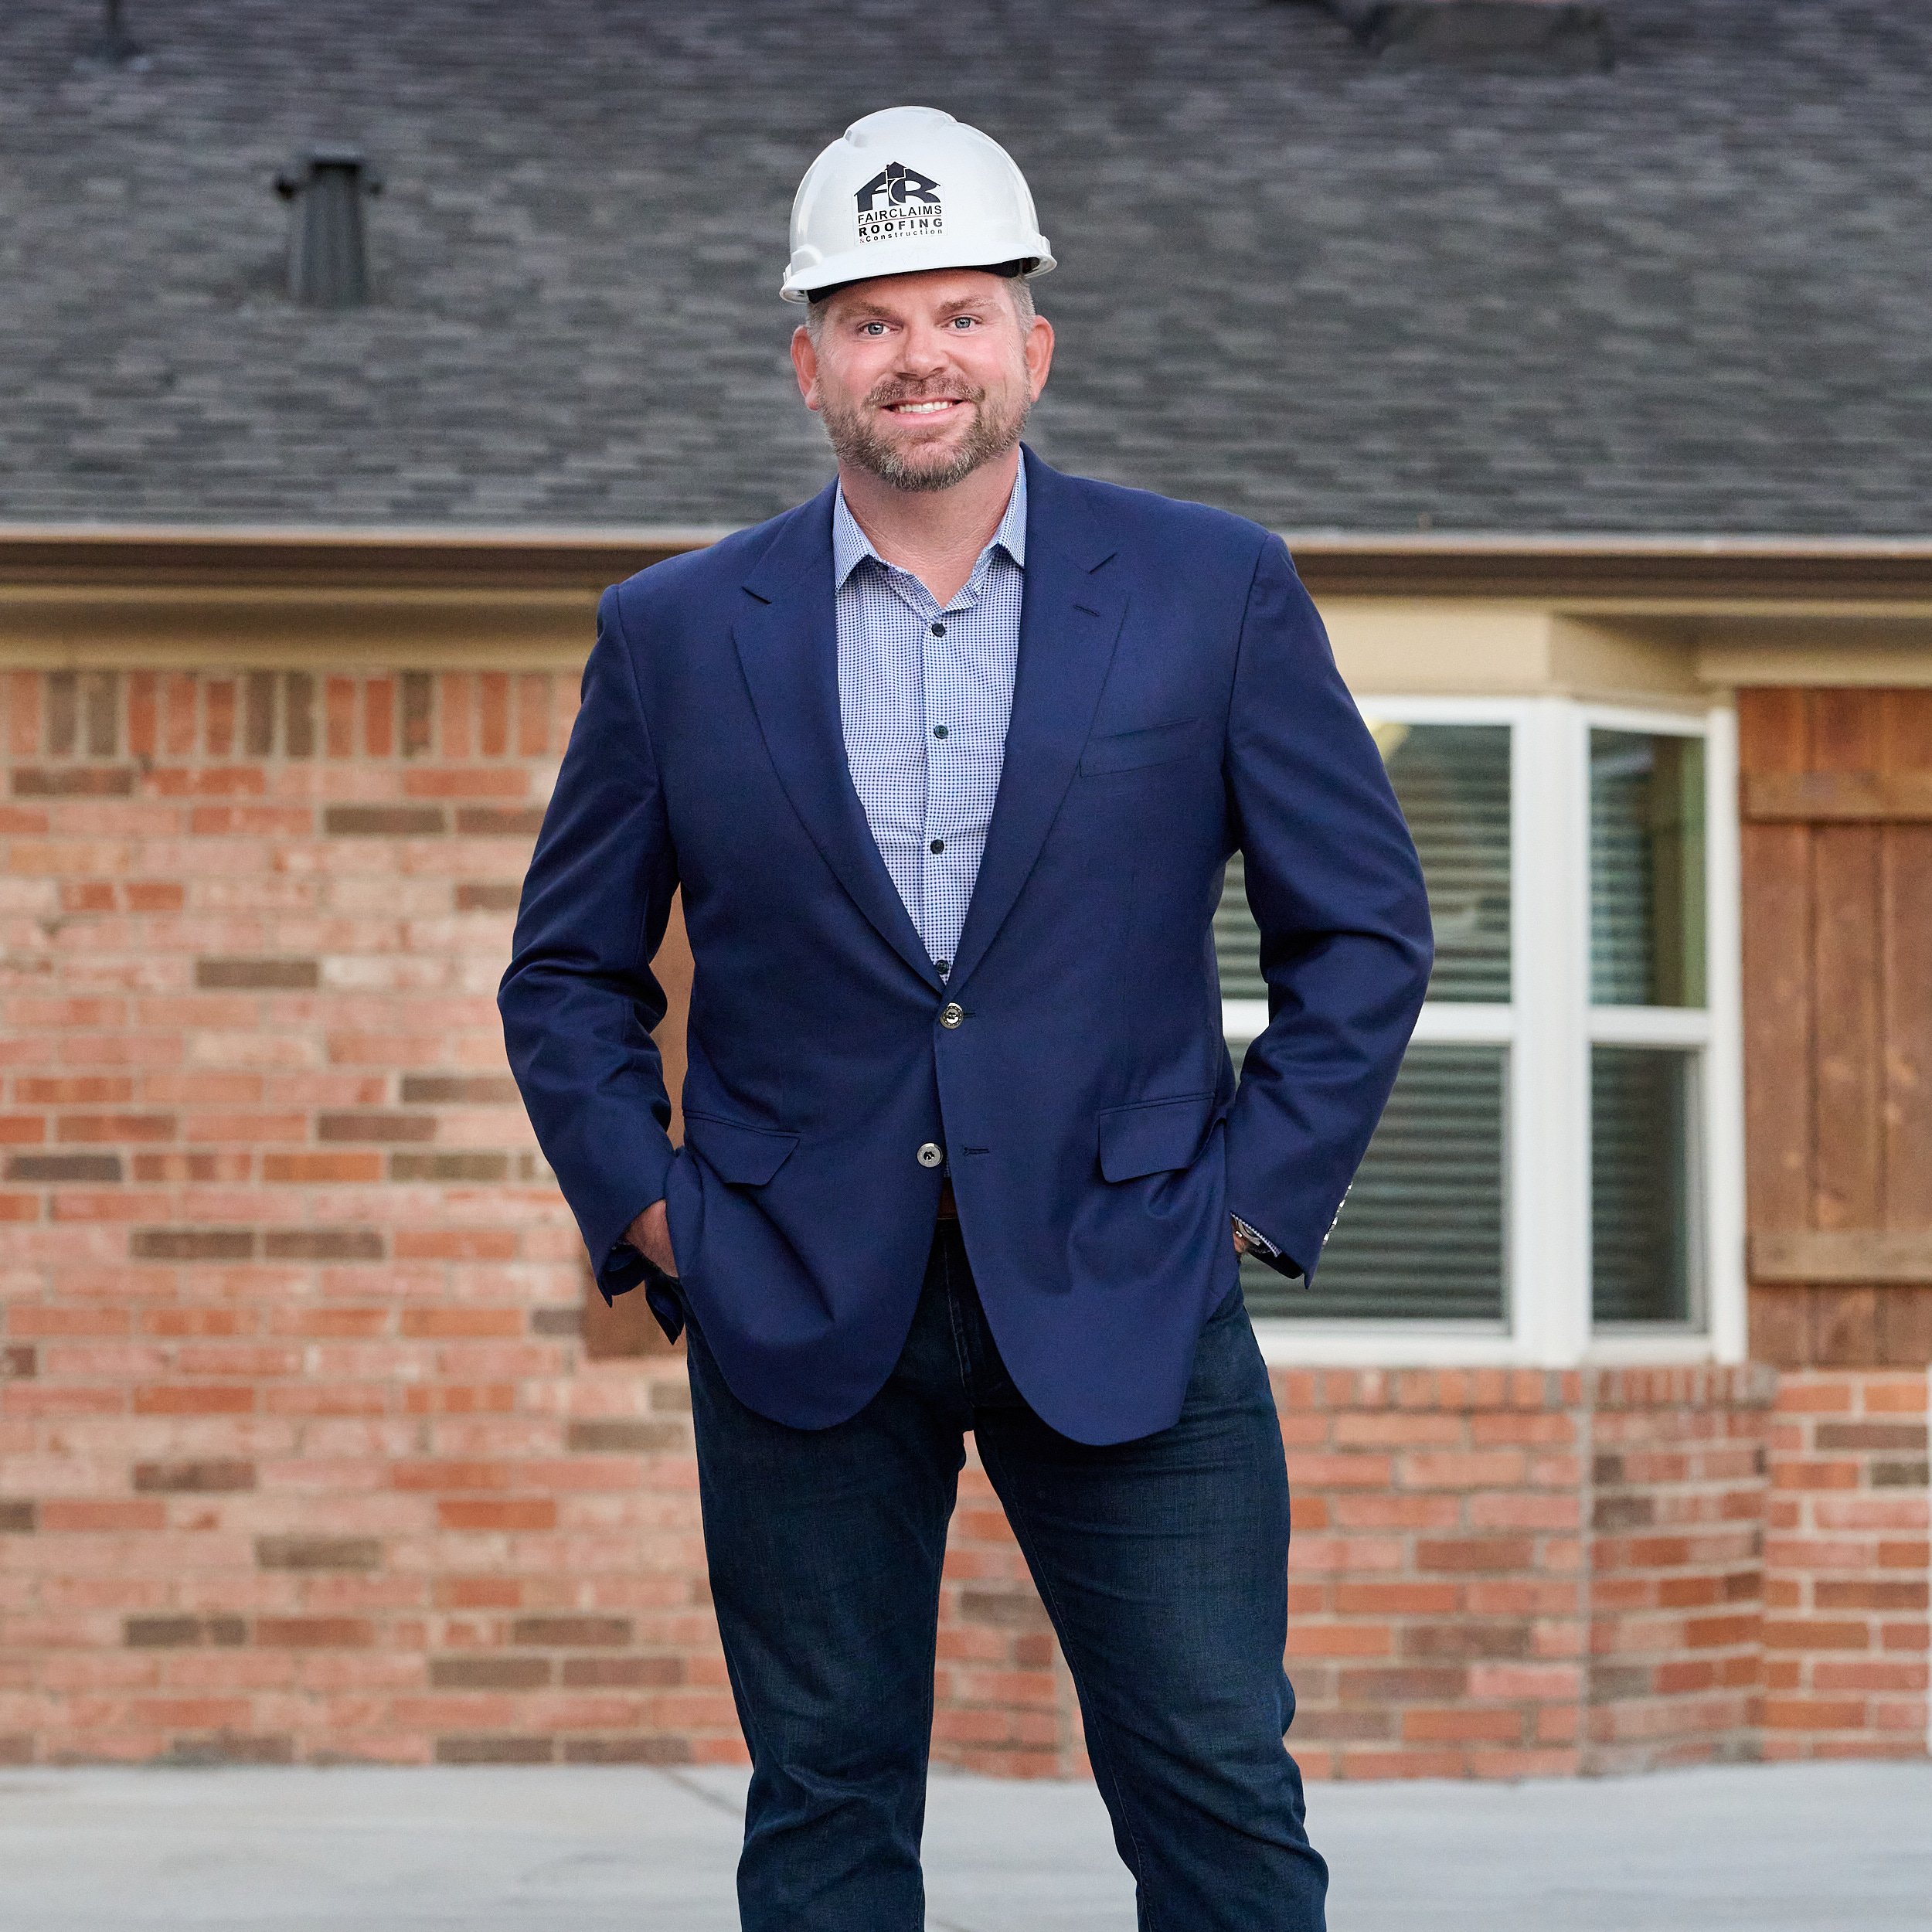  SPRING, TEXAS - SEPTEMBER 30th  2022: Justin O'Neal of Fairclaims Roofing & Construction is posing in a suit and helmet for environmental portraits at his office to promote his business at Living Magazine 